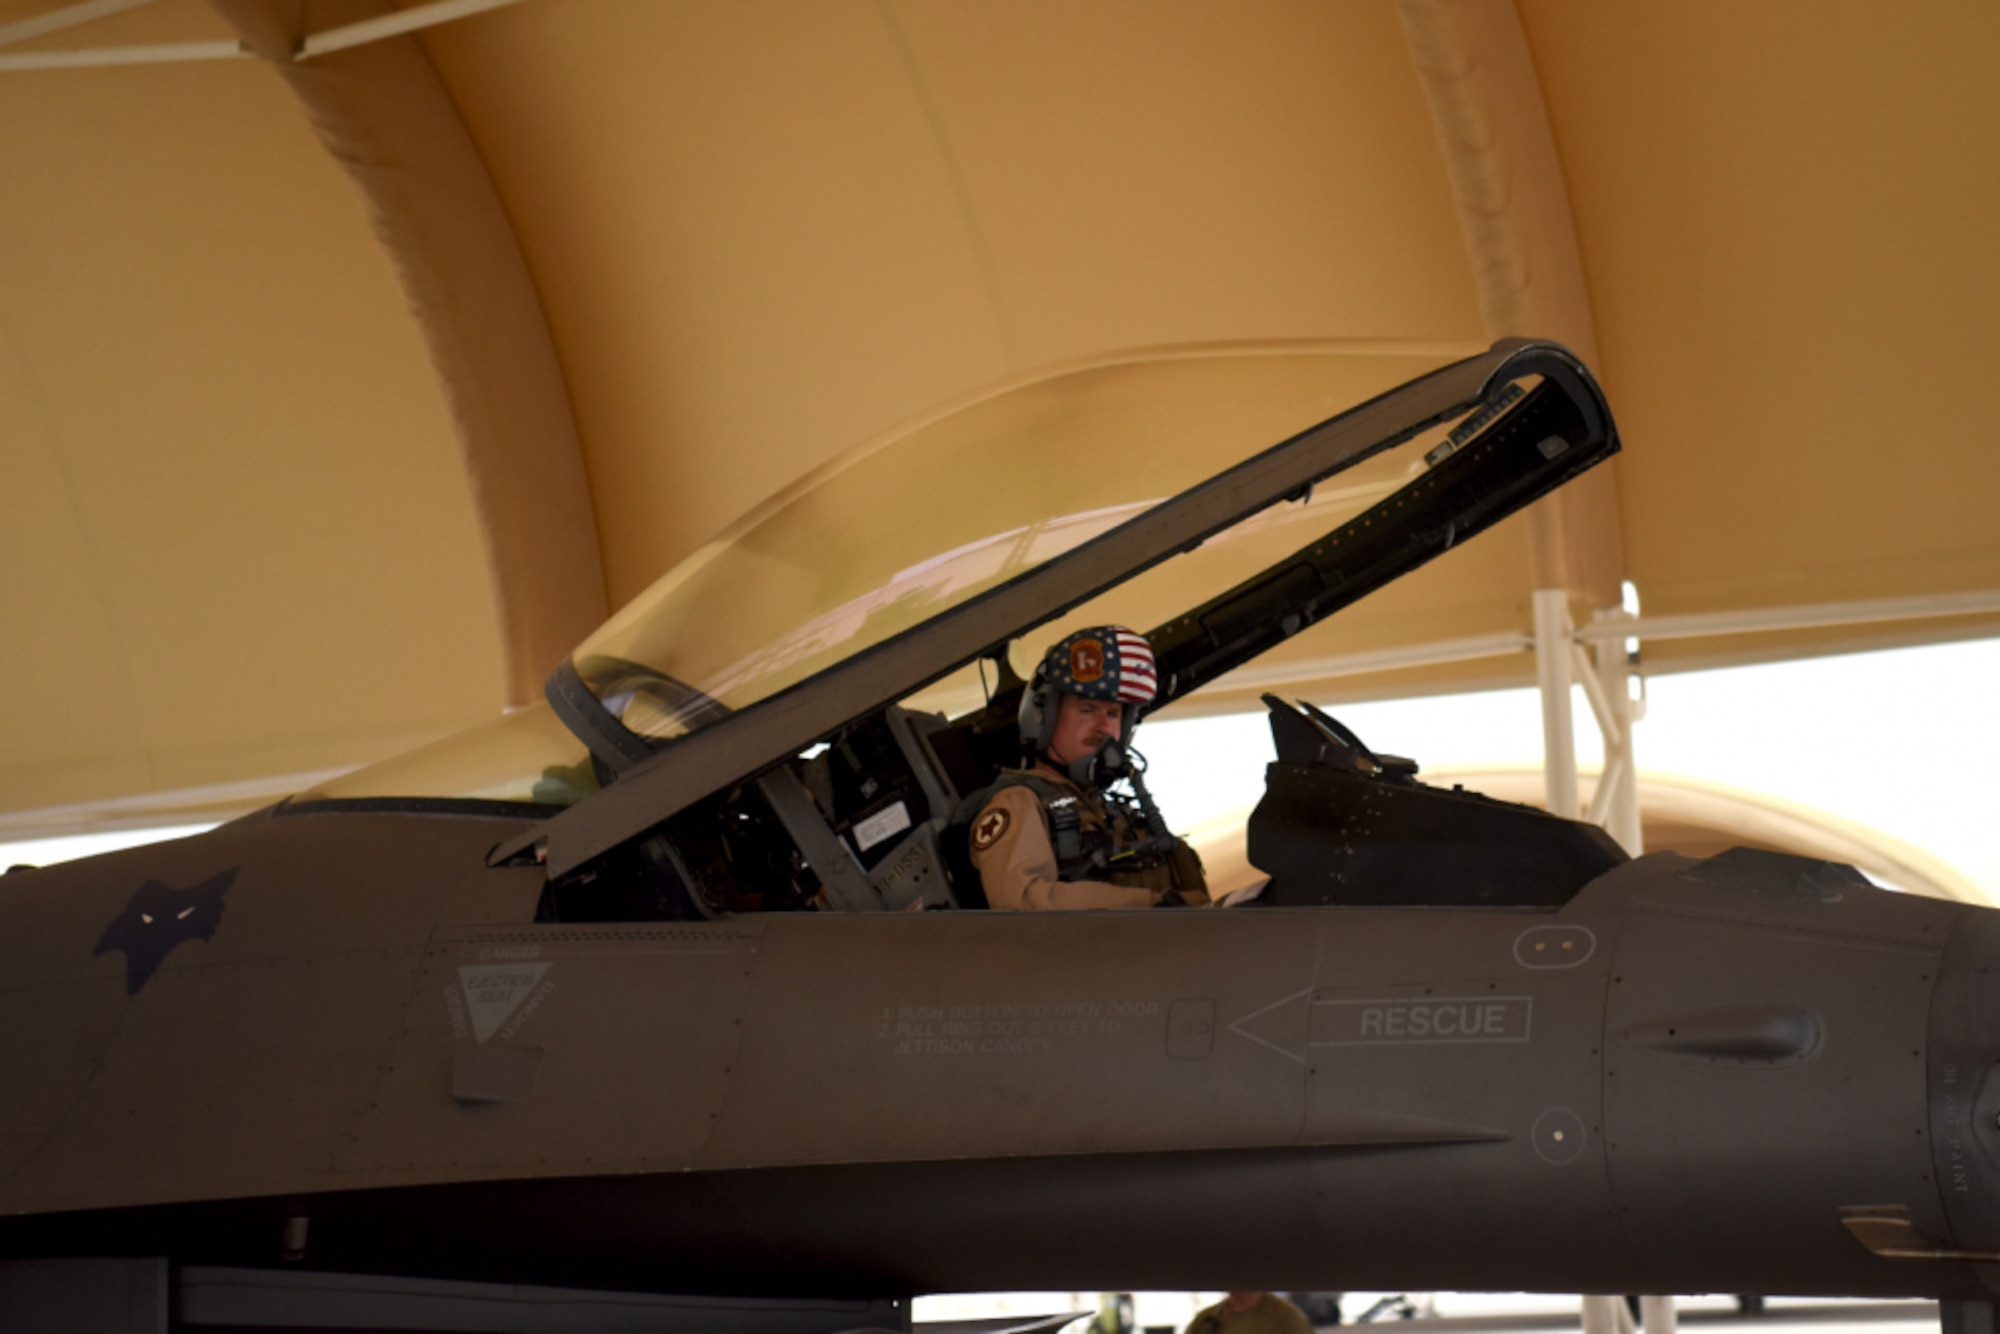 Maj. Shaun Hoeltje, 157th Expeditionary Fighter Squadron pilot, prepares for a flight aboard an F-16 Fighting Falcon fighter jet at Prince Sultan Air Base, Kingdom of Saudi Arabia, May 16, 2021. The "Swamp Fox" airmen from the South Carolina Air National Guard are deployed to PSAB to project combat power and help bolster defensive capabilities against potential threats in the region. (U.S. Air National Guard photo by Senior Master Sgt. Carl Clegg, 169th Fighter Wing Public Affairs)